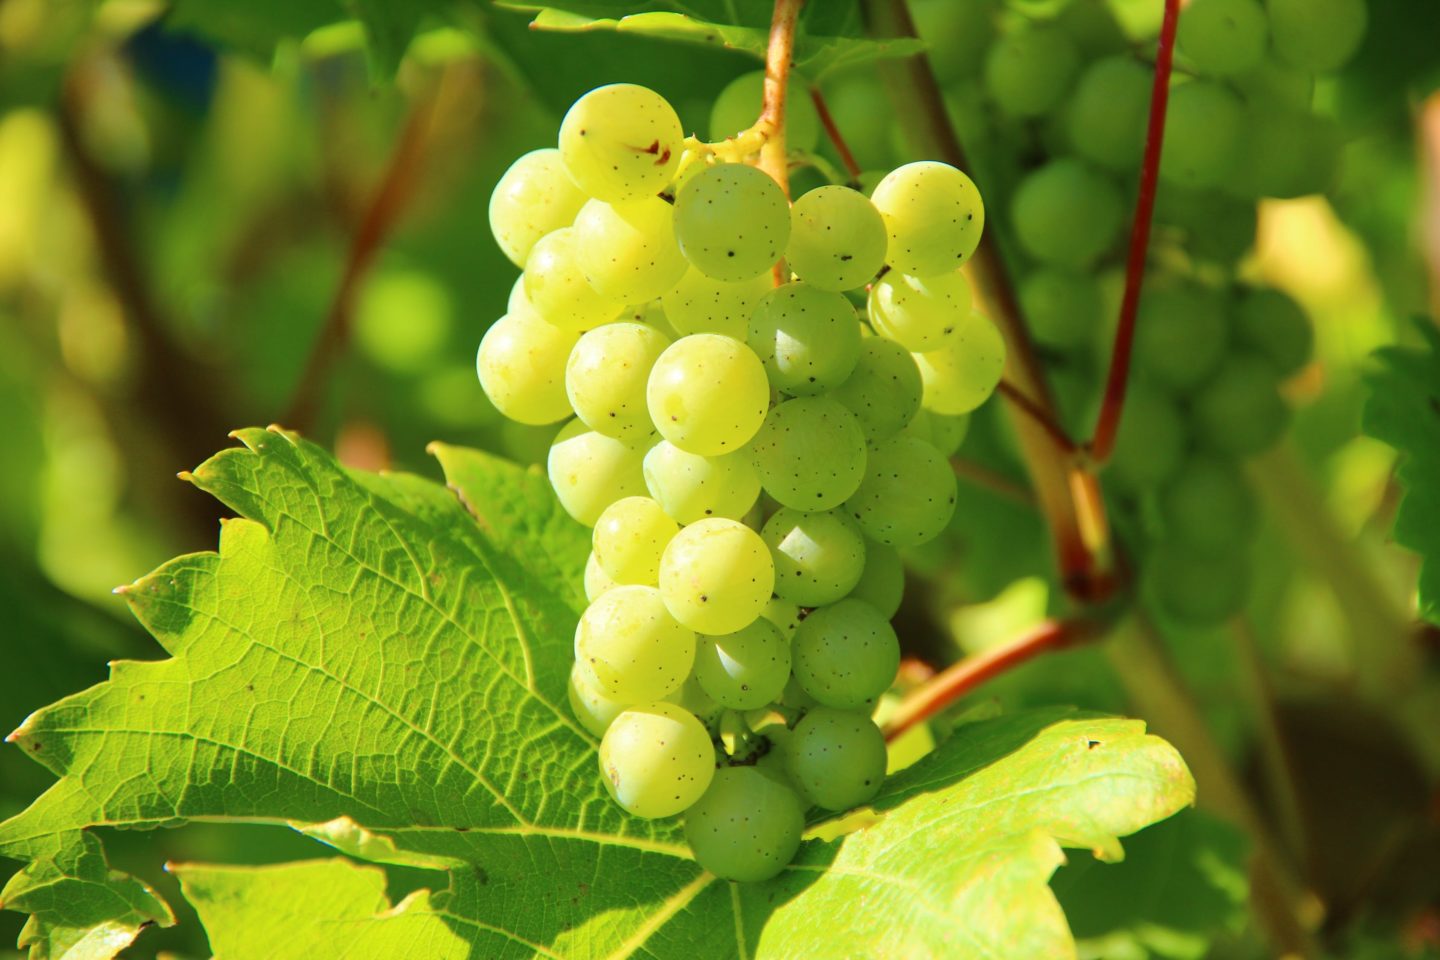 Is Eating Grapes Good For You? 32 Studies Reviewed